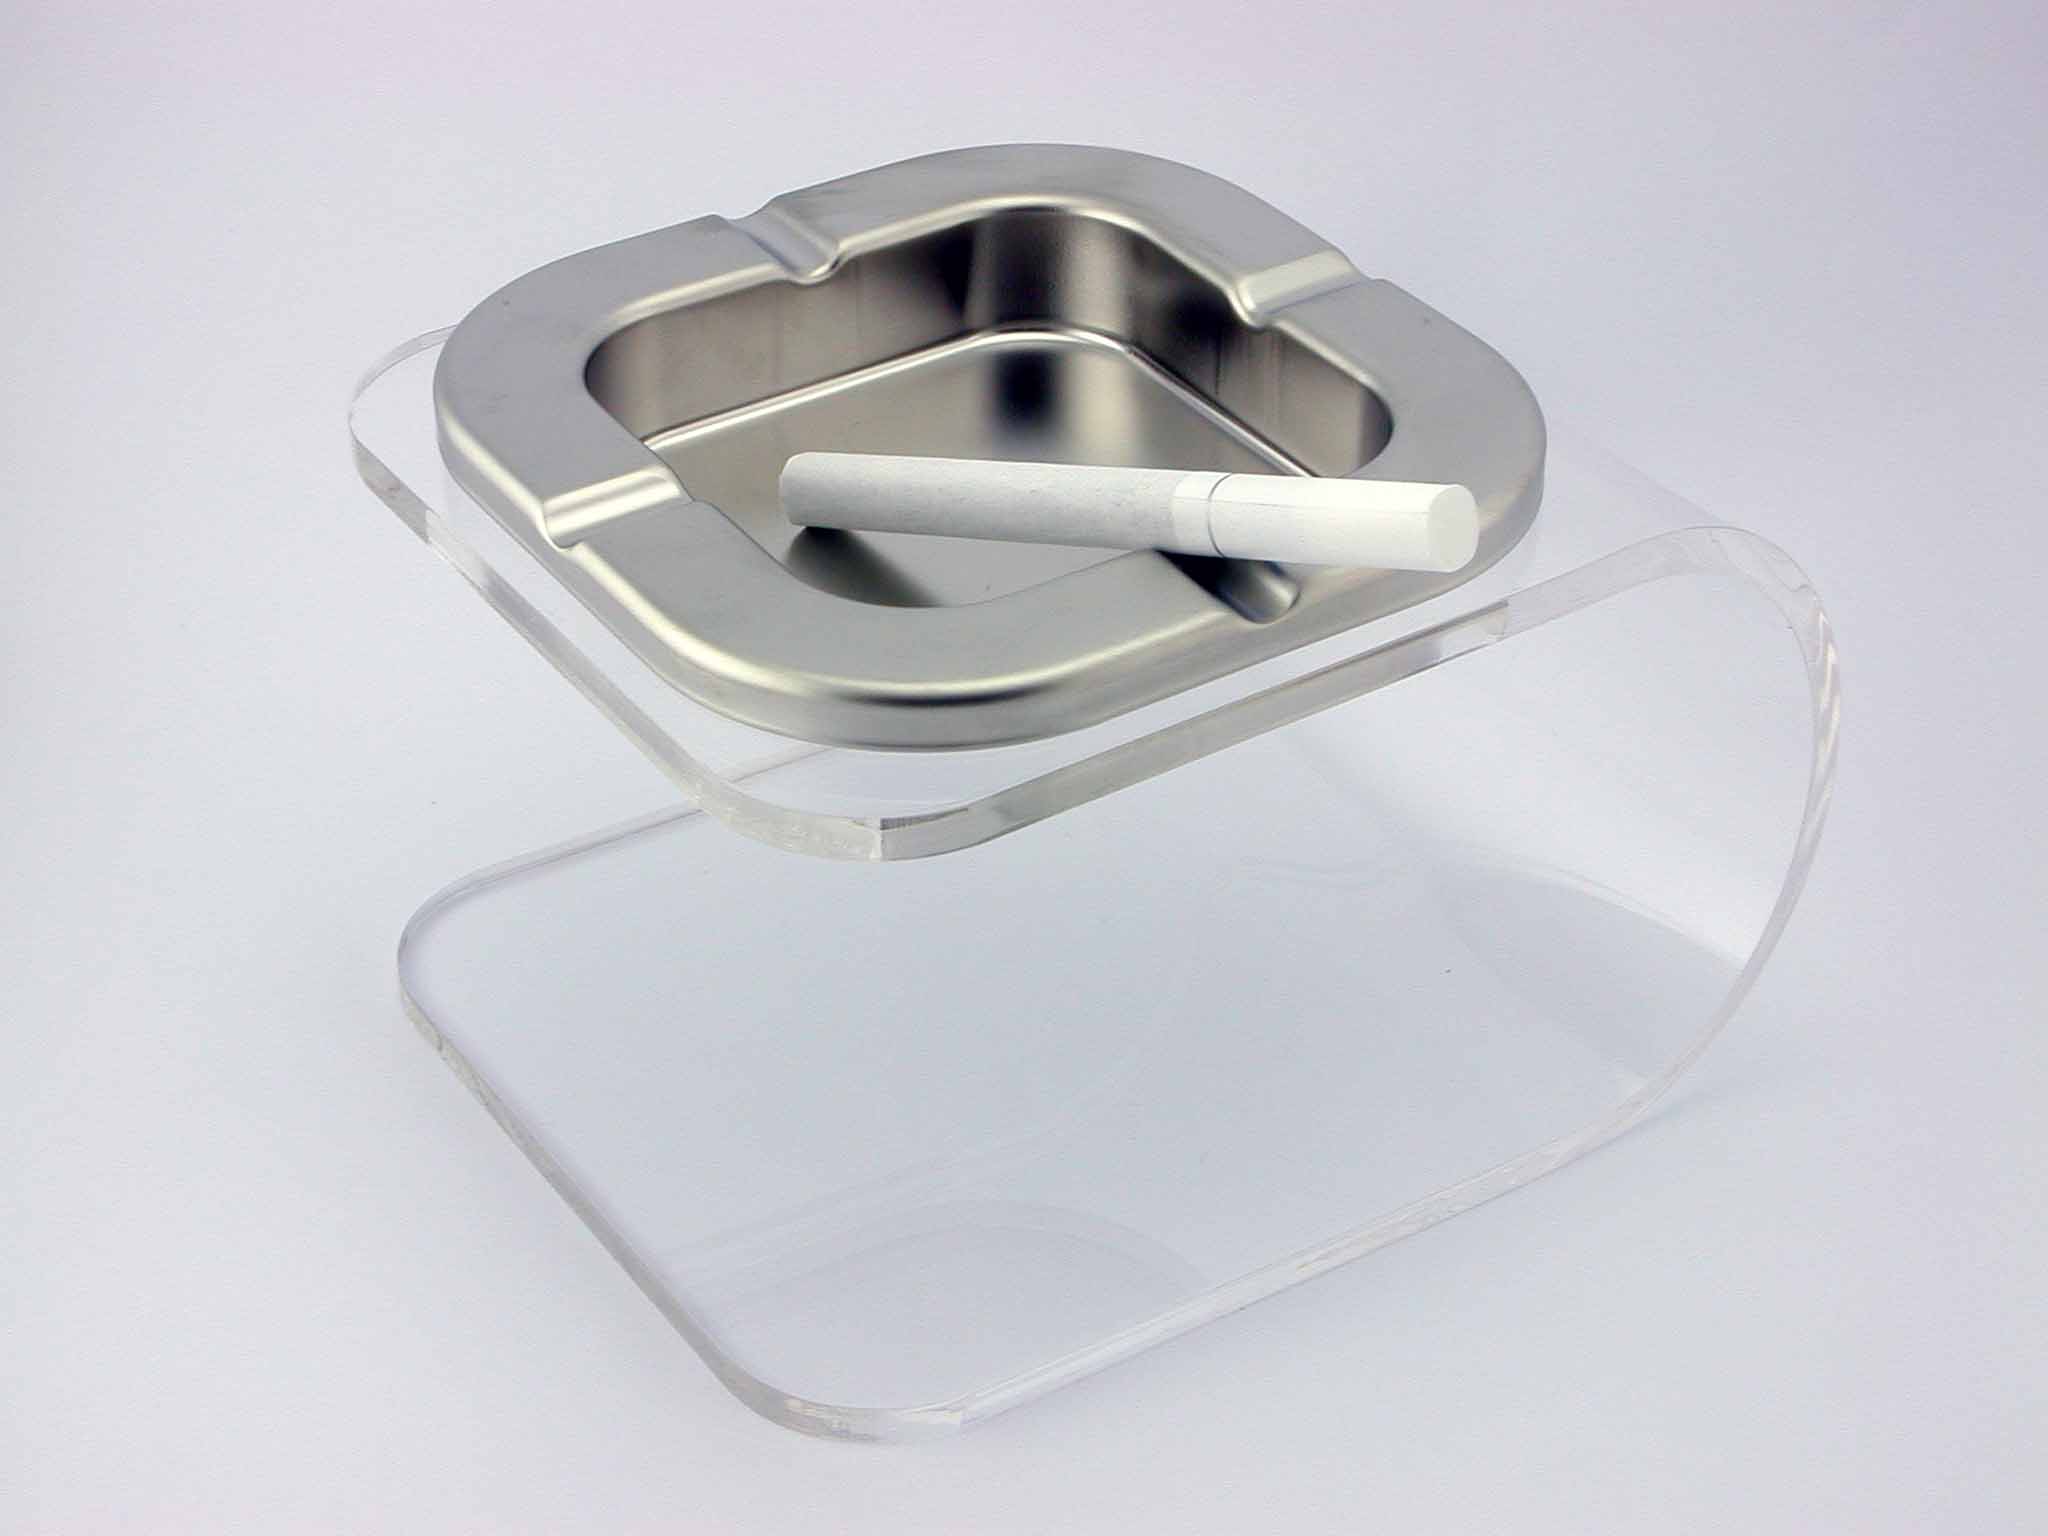  Acrylic Ashtray With Stand In Slingshot Shape (Acryl Aschenbecher Fuß in Form Slingshot)